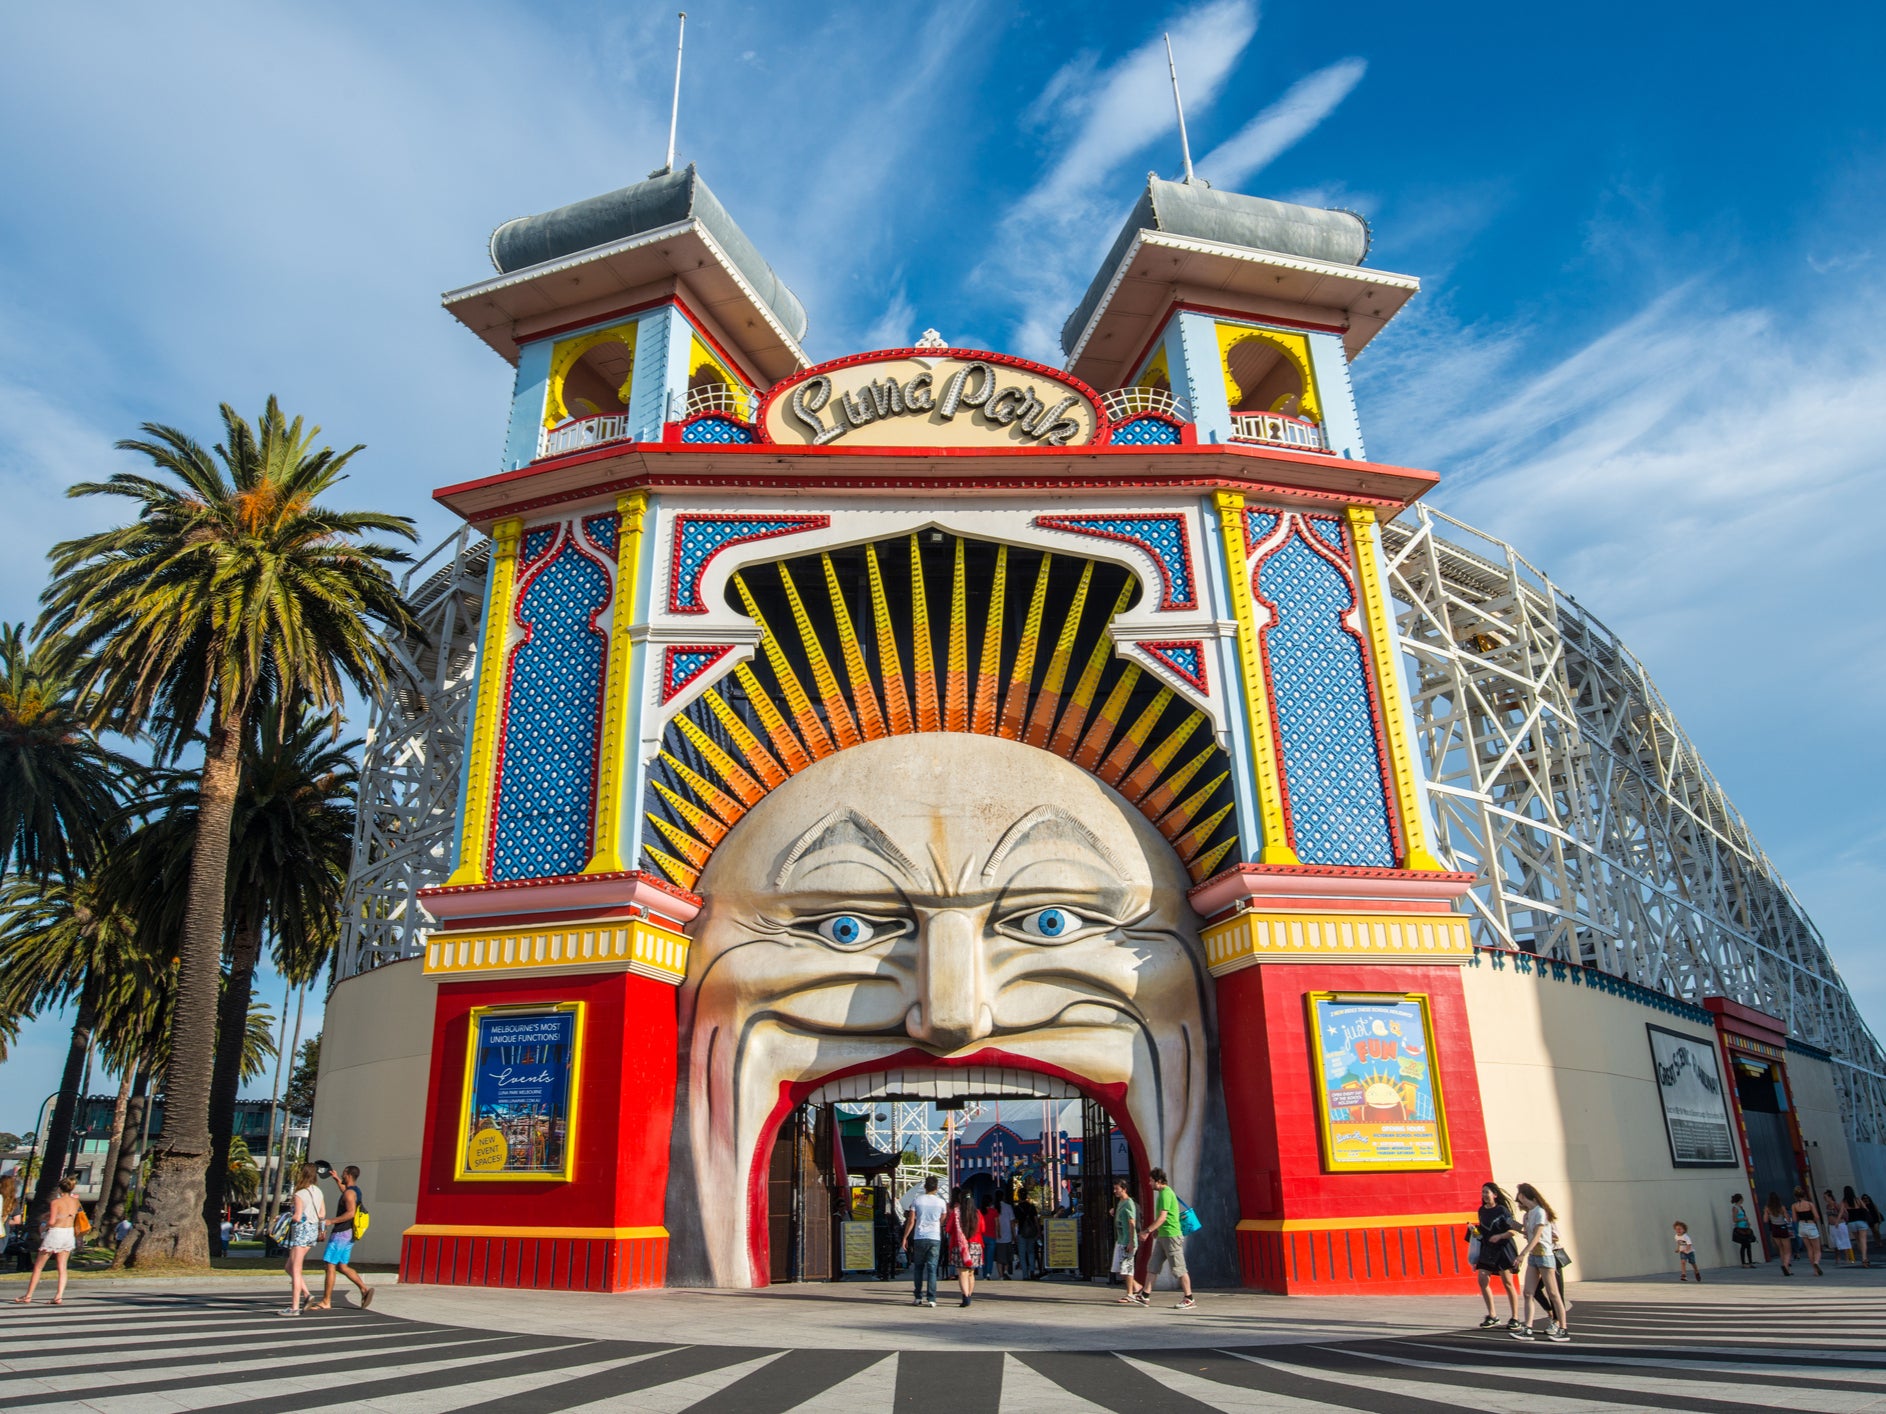 The amusements at Luna Park, in St Kilda, have been open for over 100 years